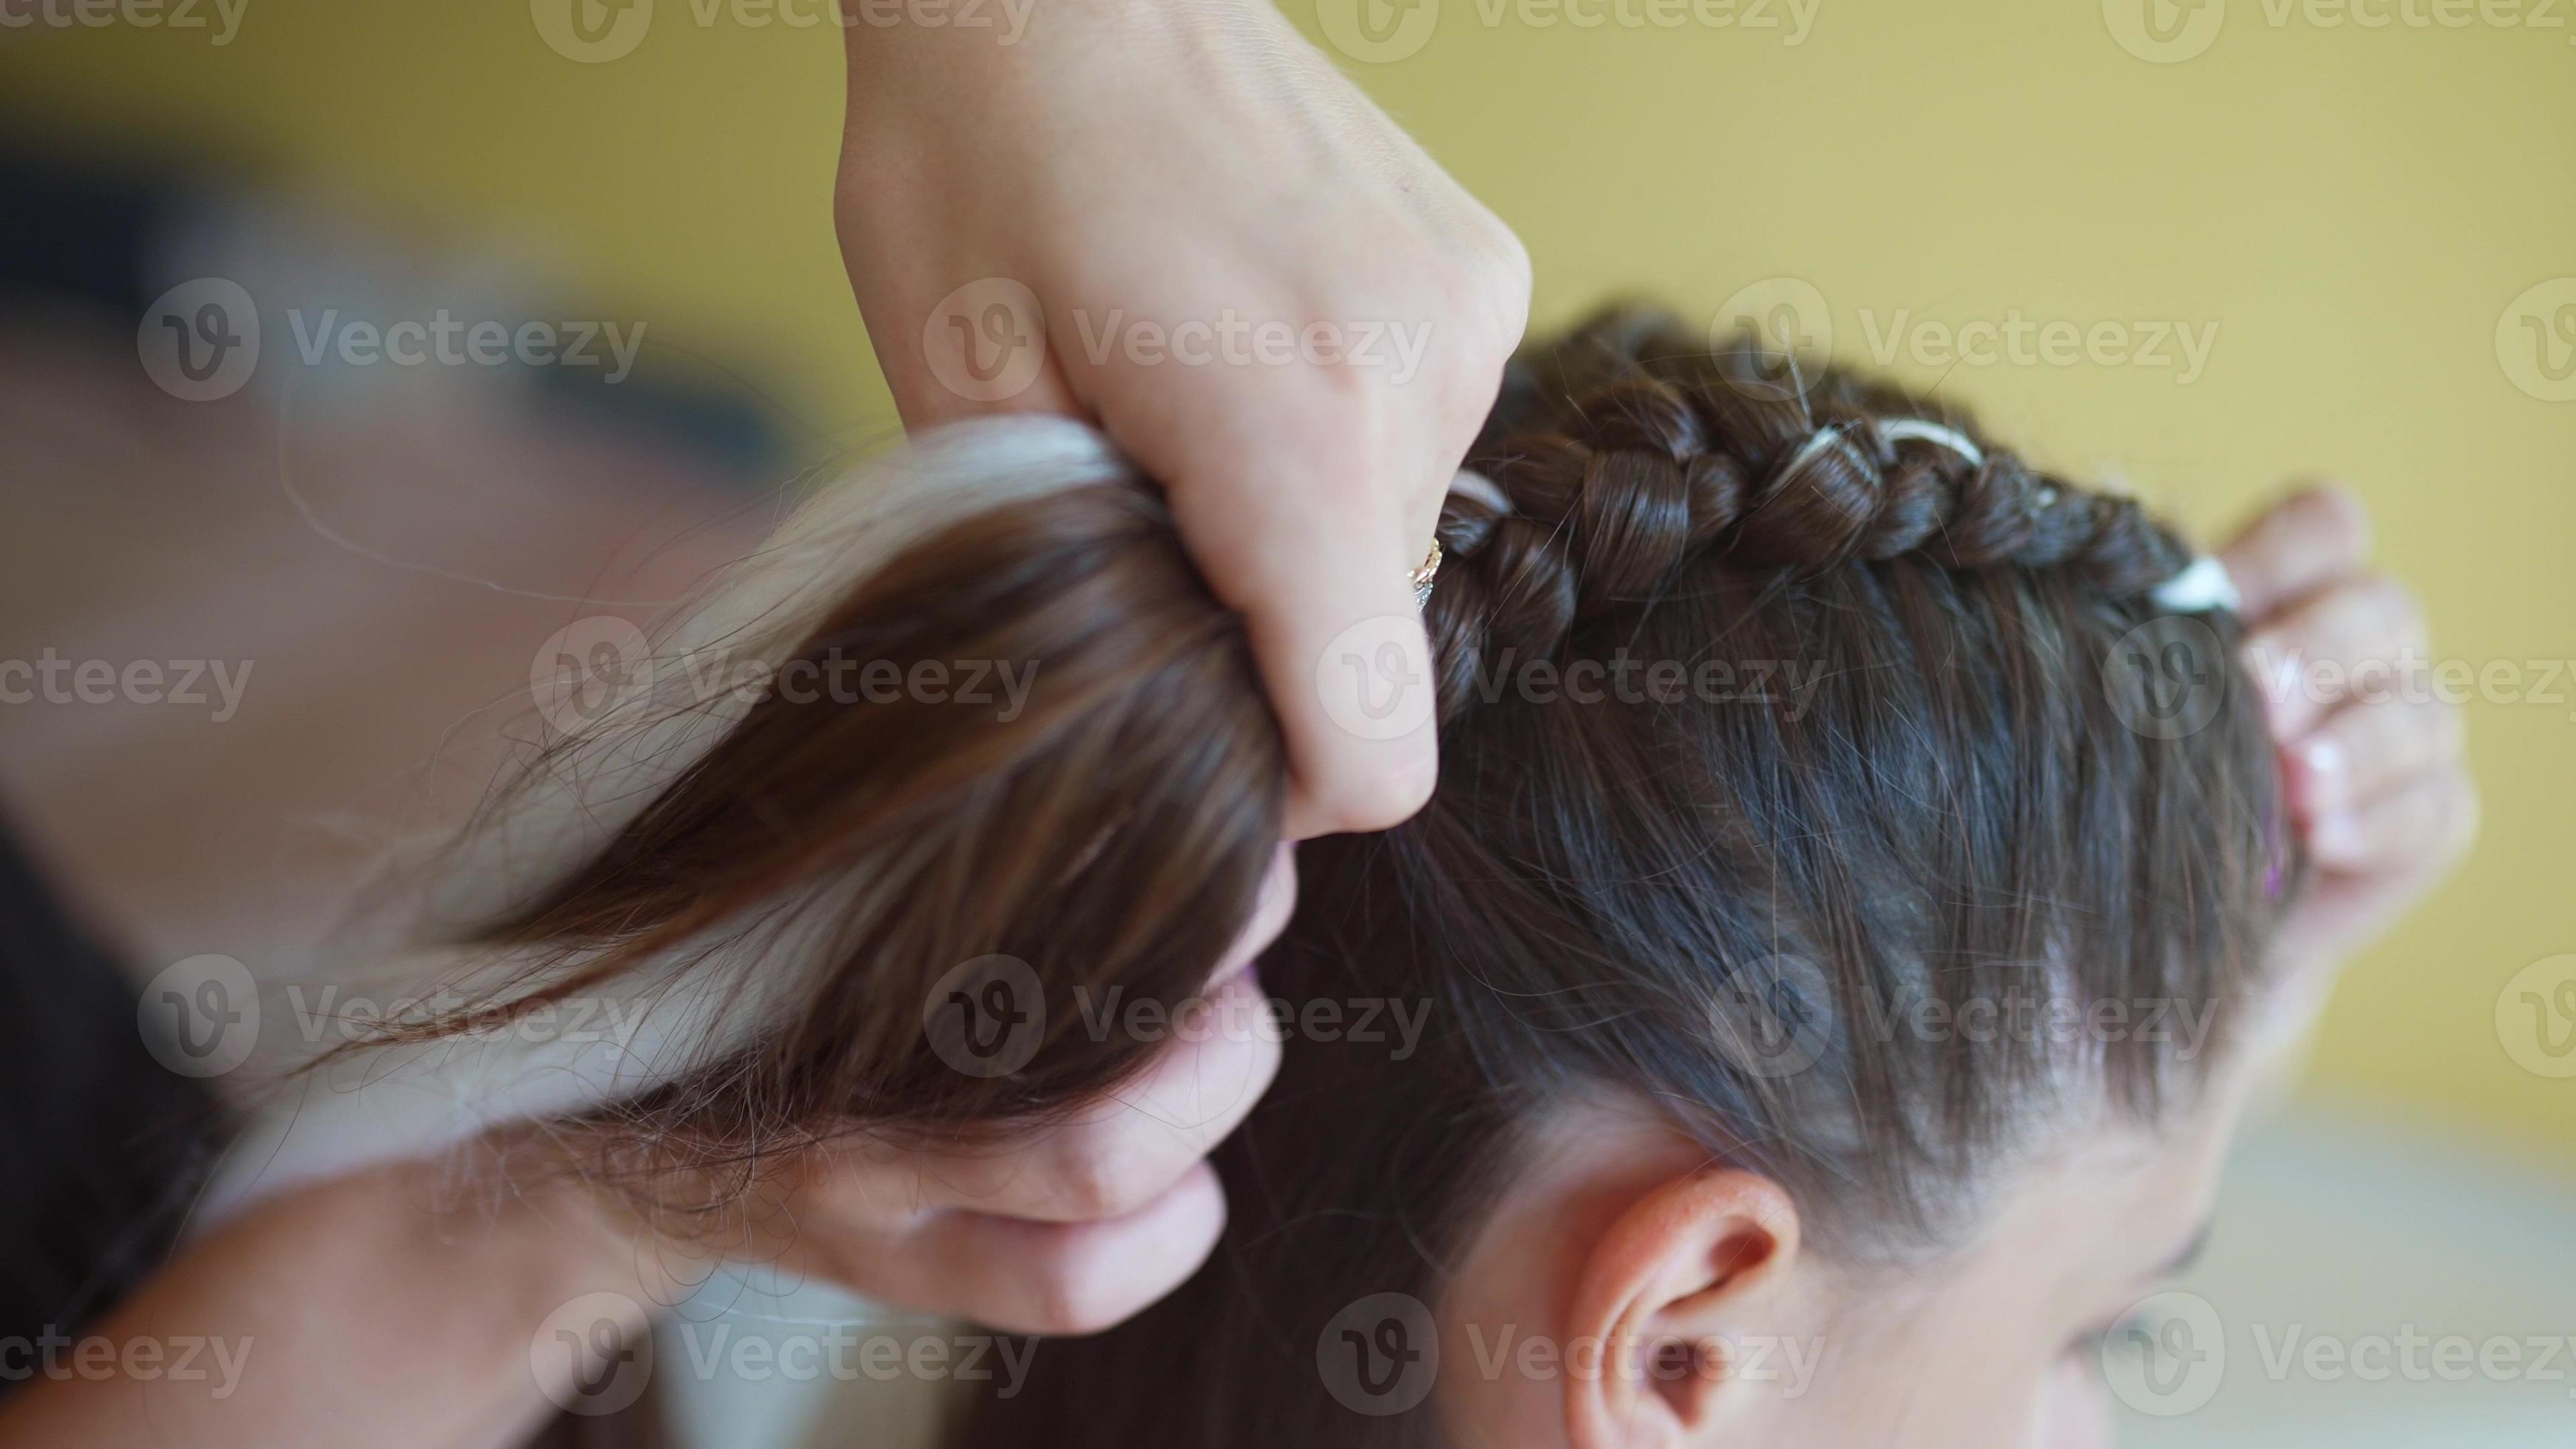 Process of braiding. Master weaves braids on head in a beauty